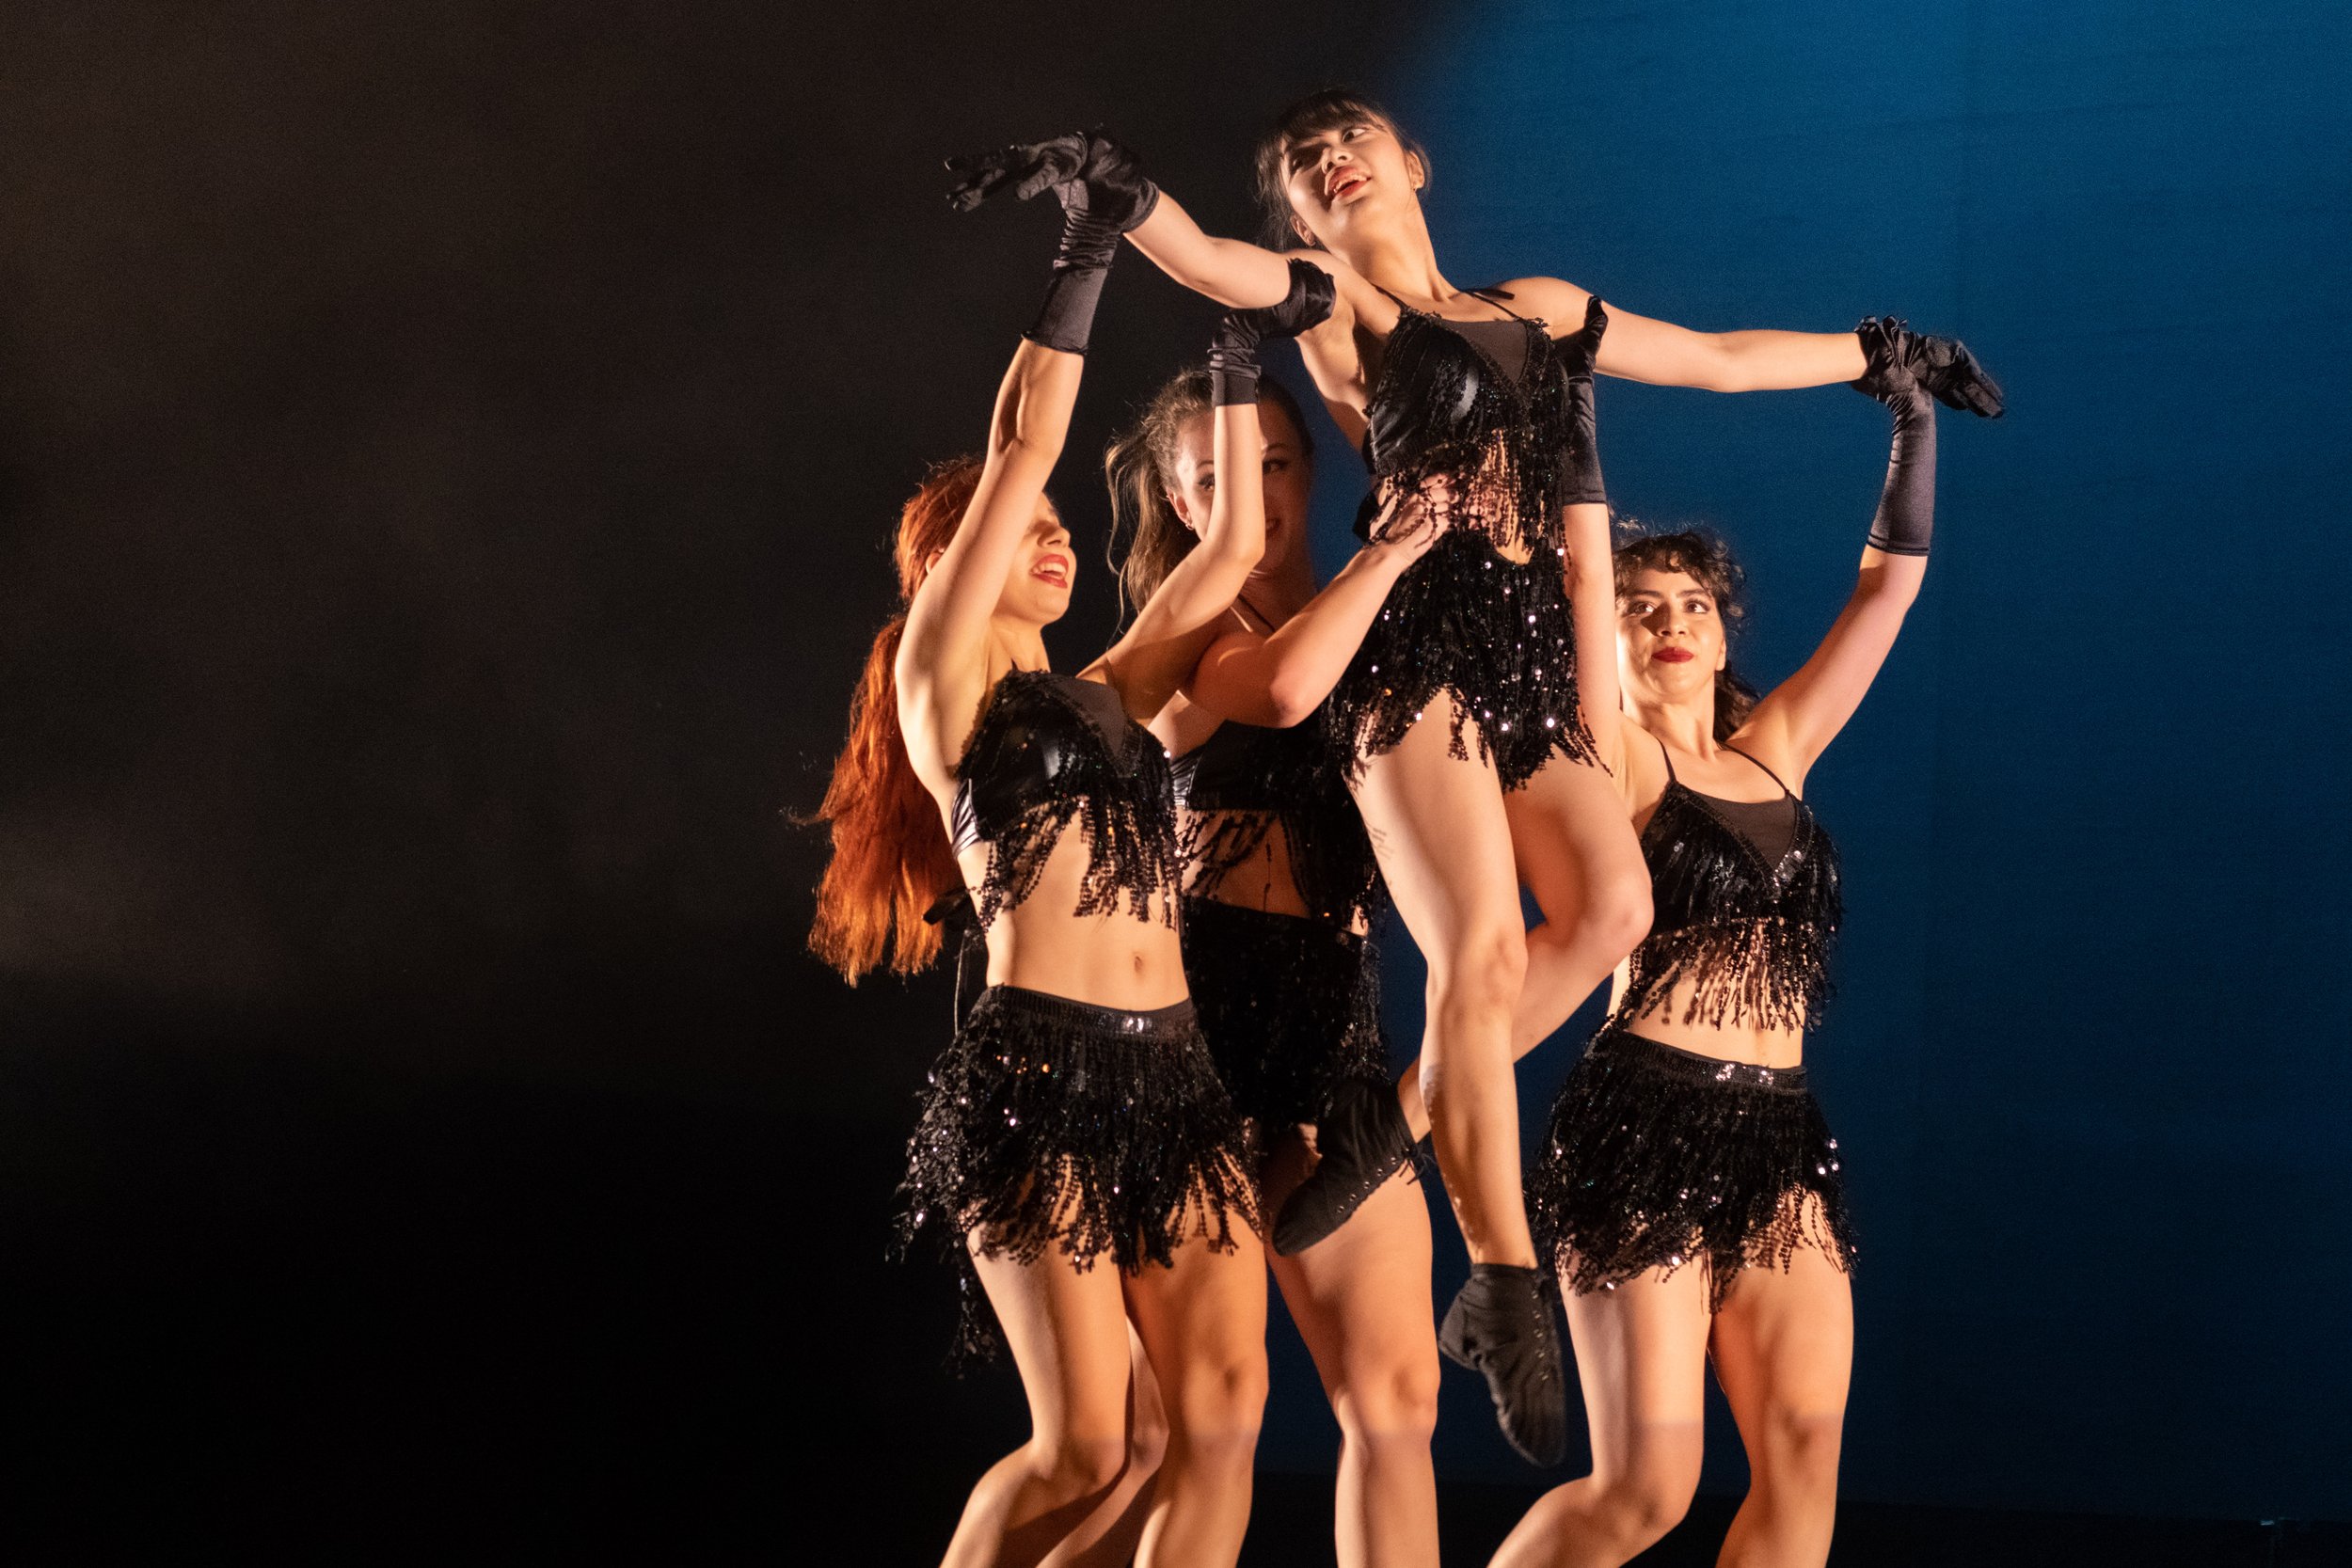  Santa Monica College students (bottom L to R) Angelina Roychenko, Zoe Miller and Sophia Aponte lift dancer Heather Ongpauco as they perform "Ladies First", a Jazz Funk choreography at the dress rehearsal for Global Motion on stage at BroadStage in S